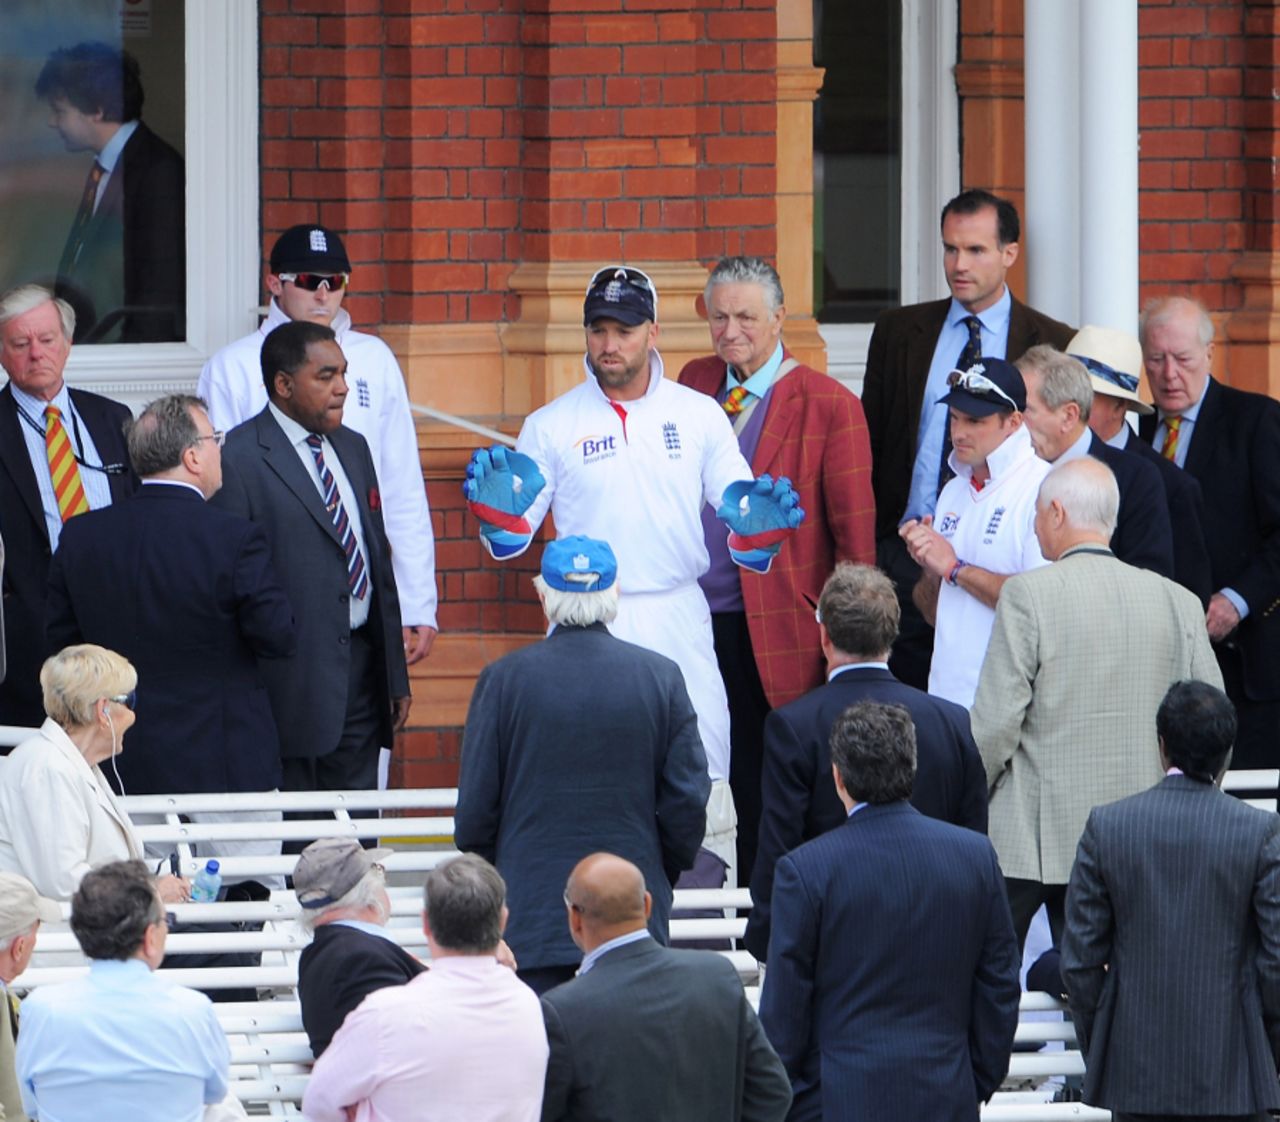 Matt Prior apologises to MCC members after smashing a window in the England dressing room at Lord's, England v Sri Lanka, 2nd Test, Lord's, 5th day, June 7 2011